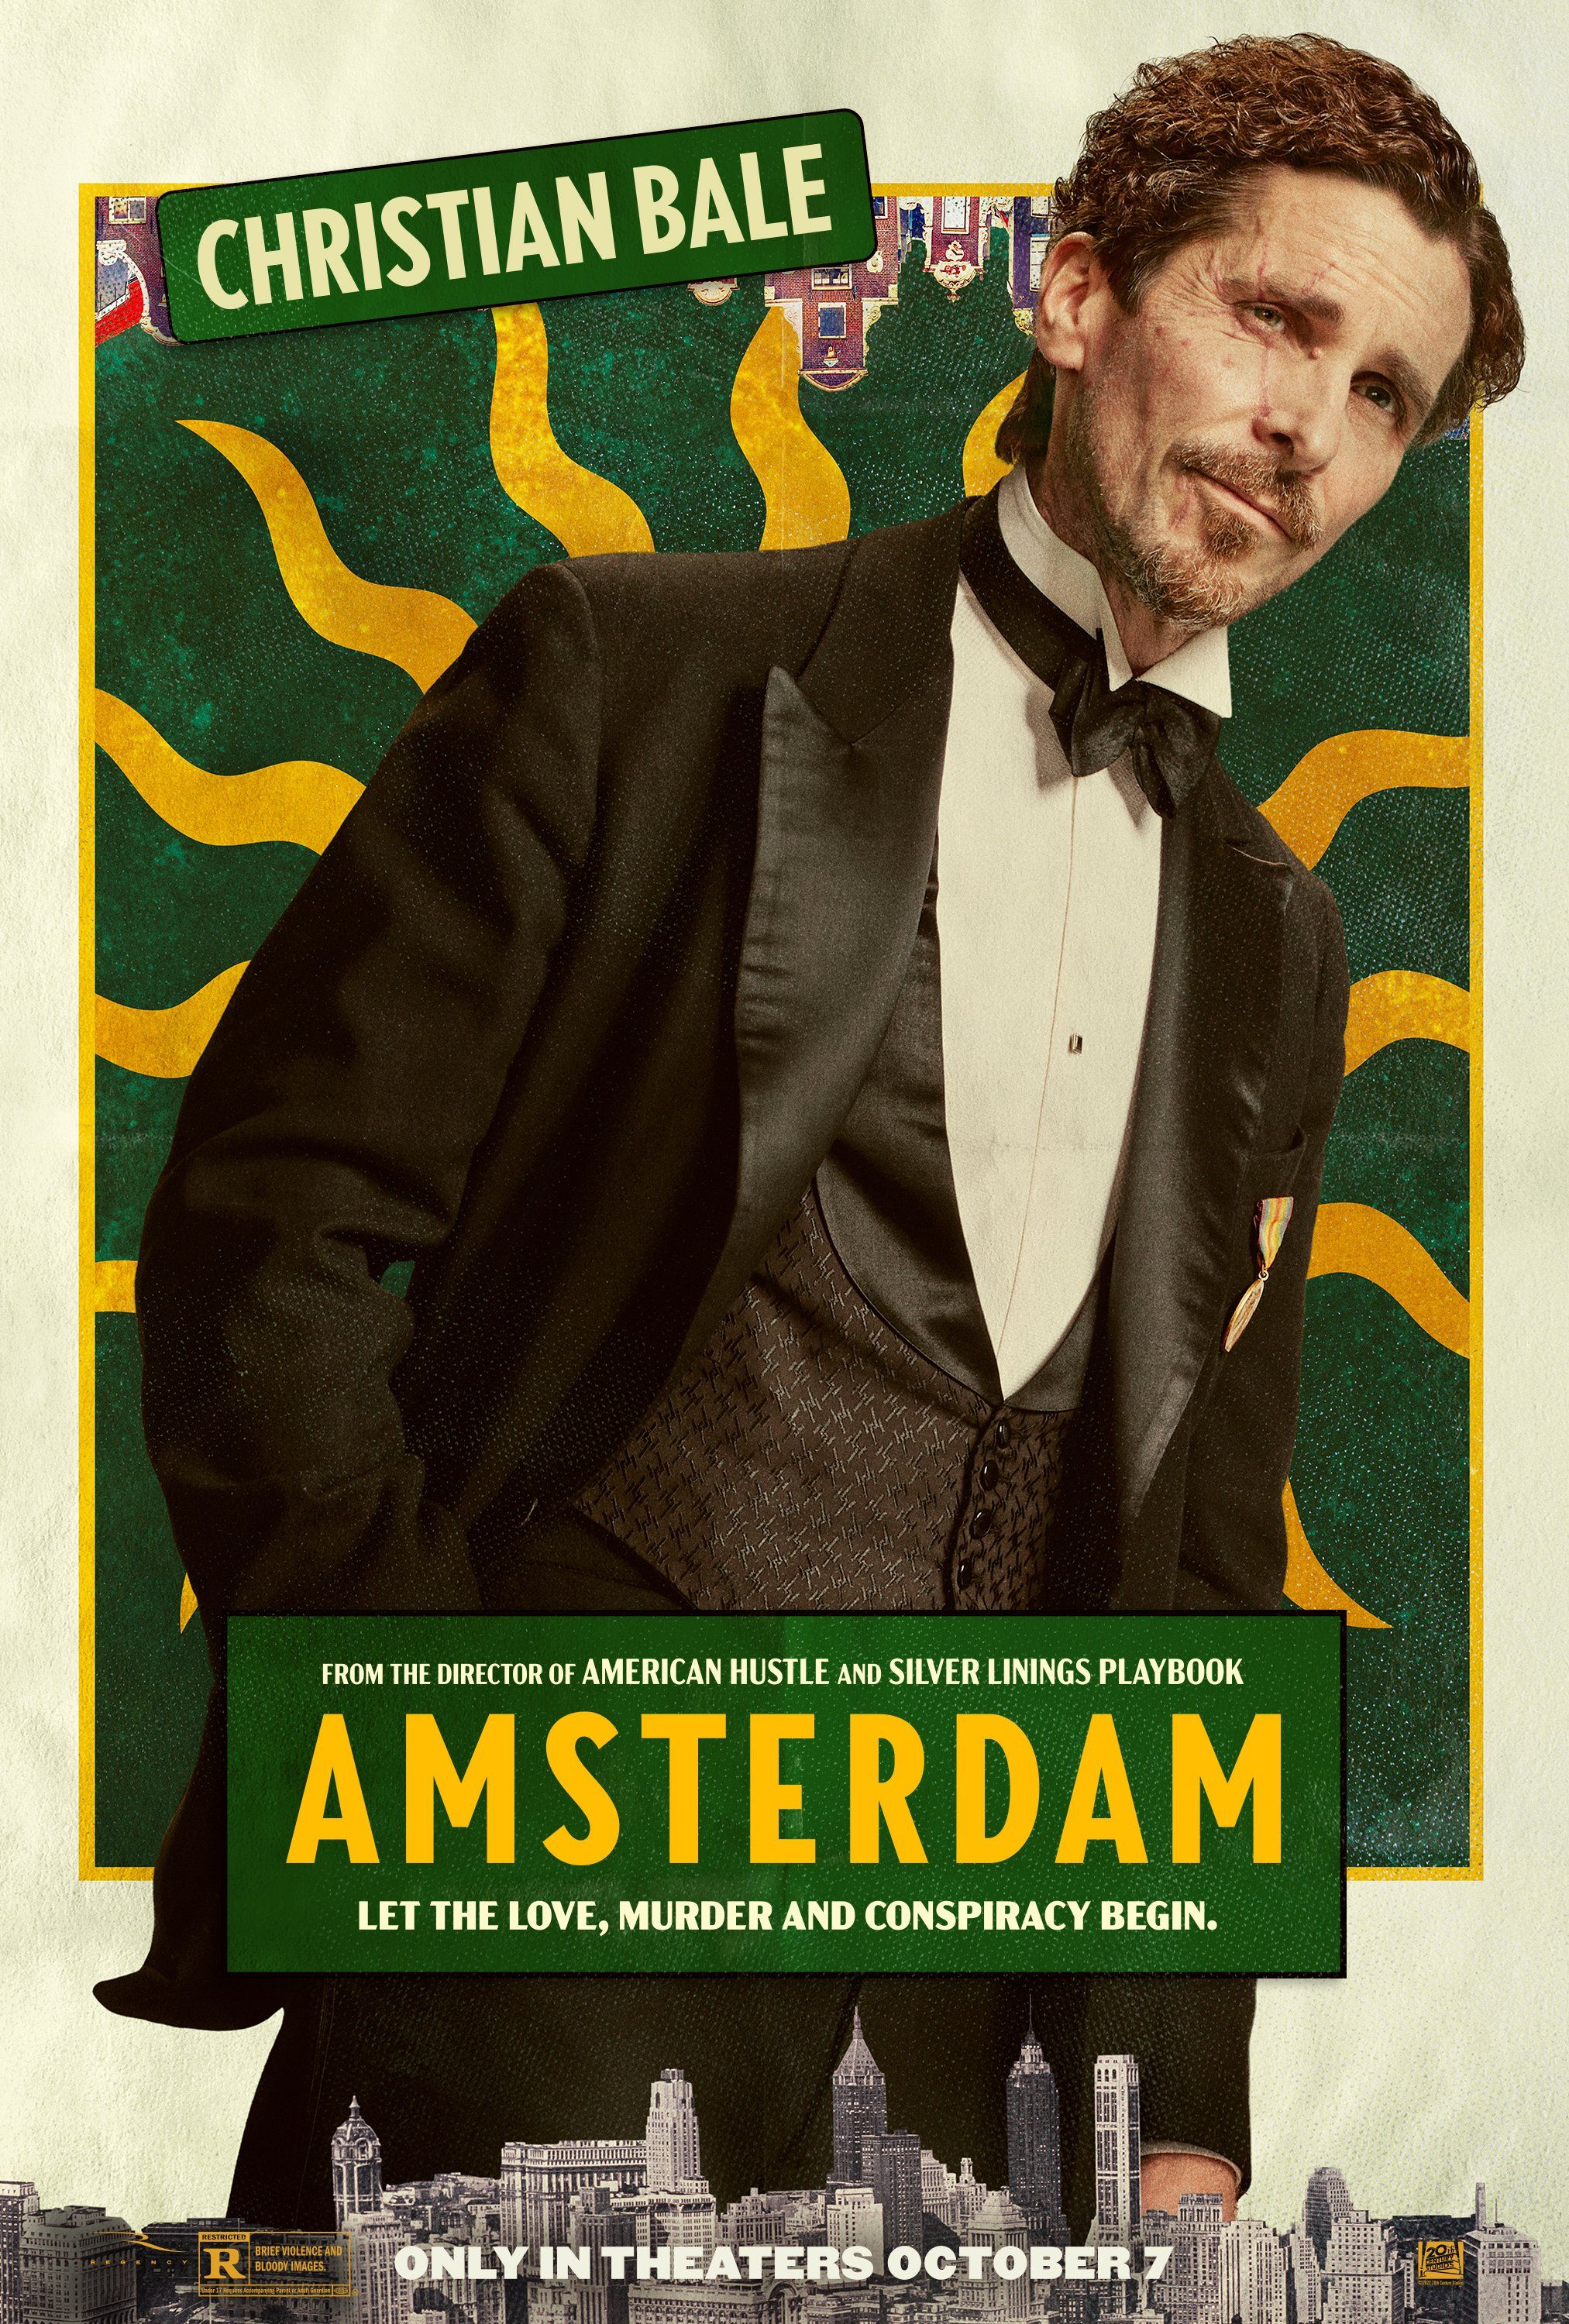 Christian-Bale-in-Amsterdam-poster-1